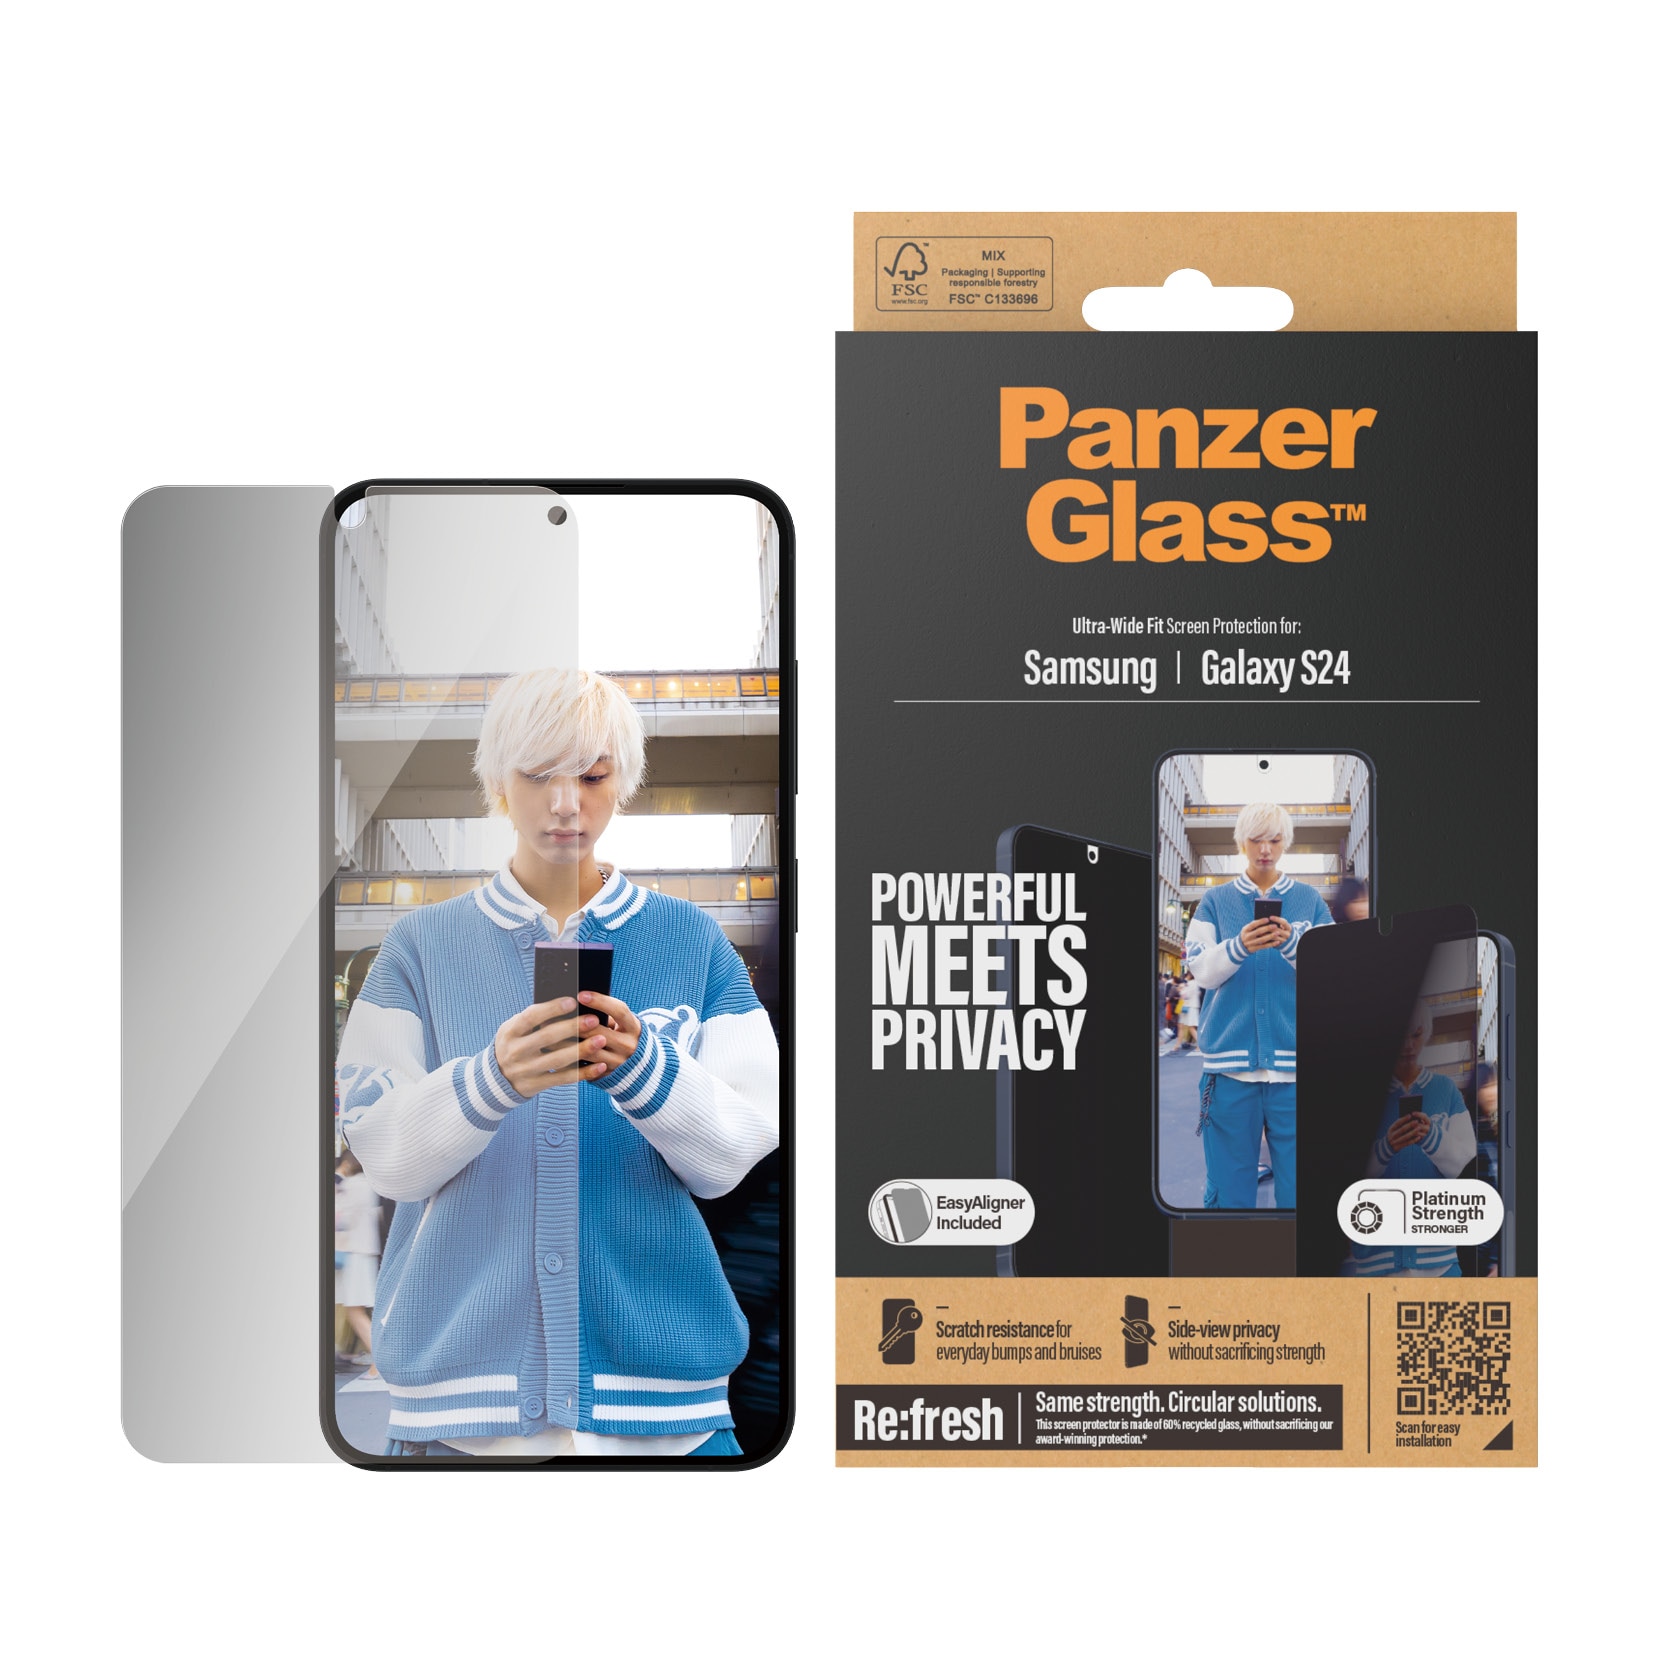 PanzerGlass Samsung Galaxy S24 Privacy Screen Protector (with EasyAligner)  Ultra Wide Fit